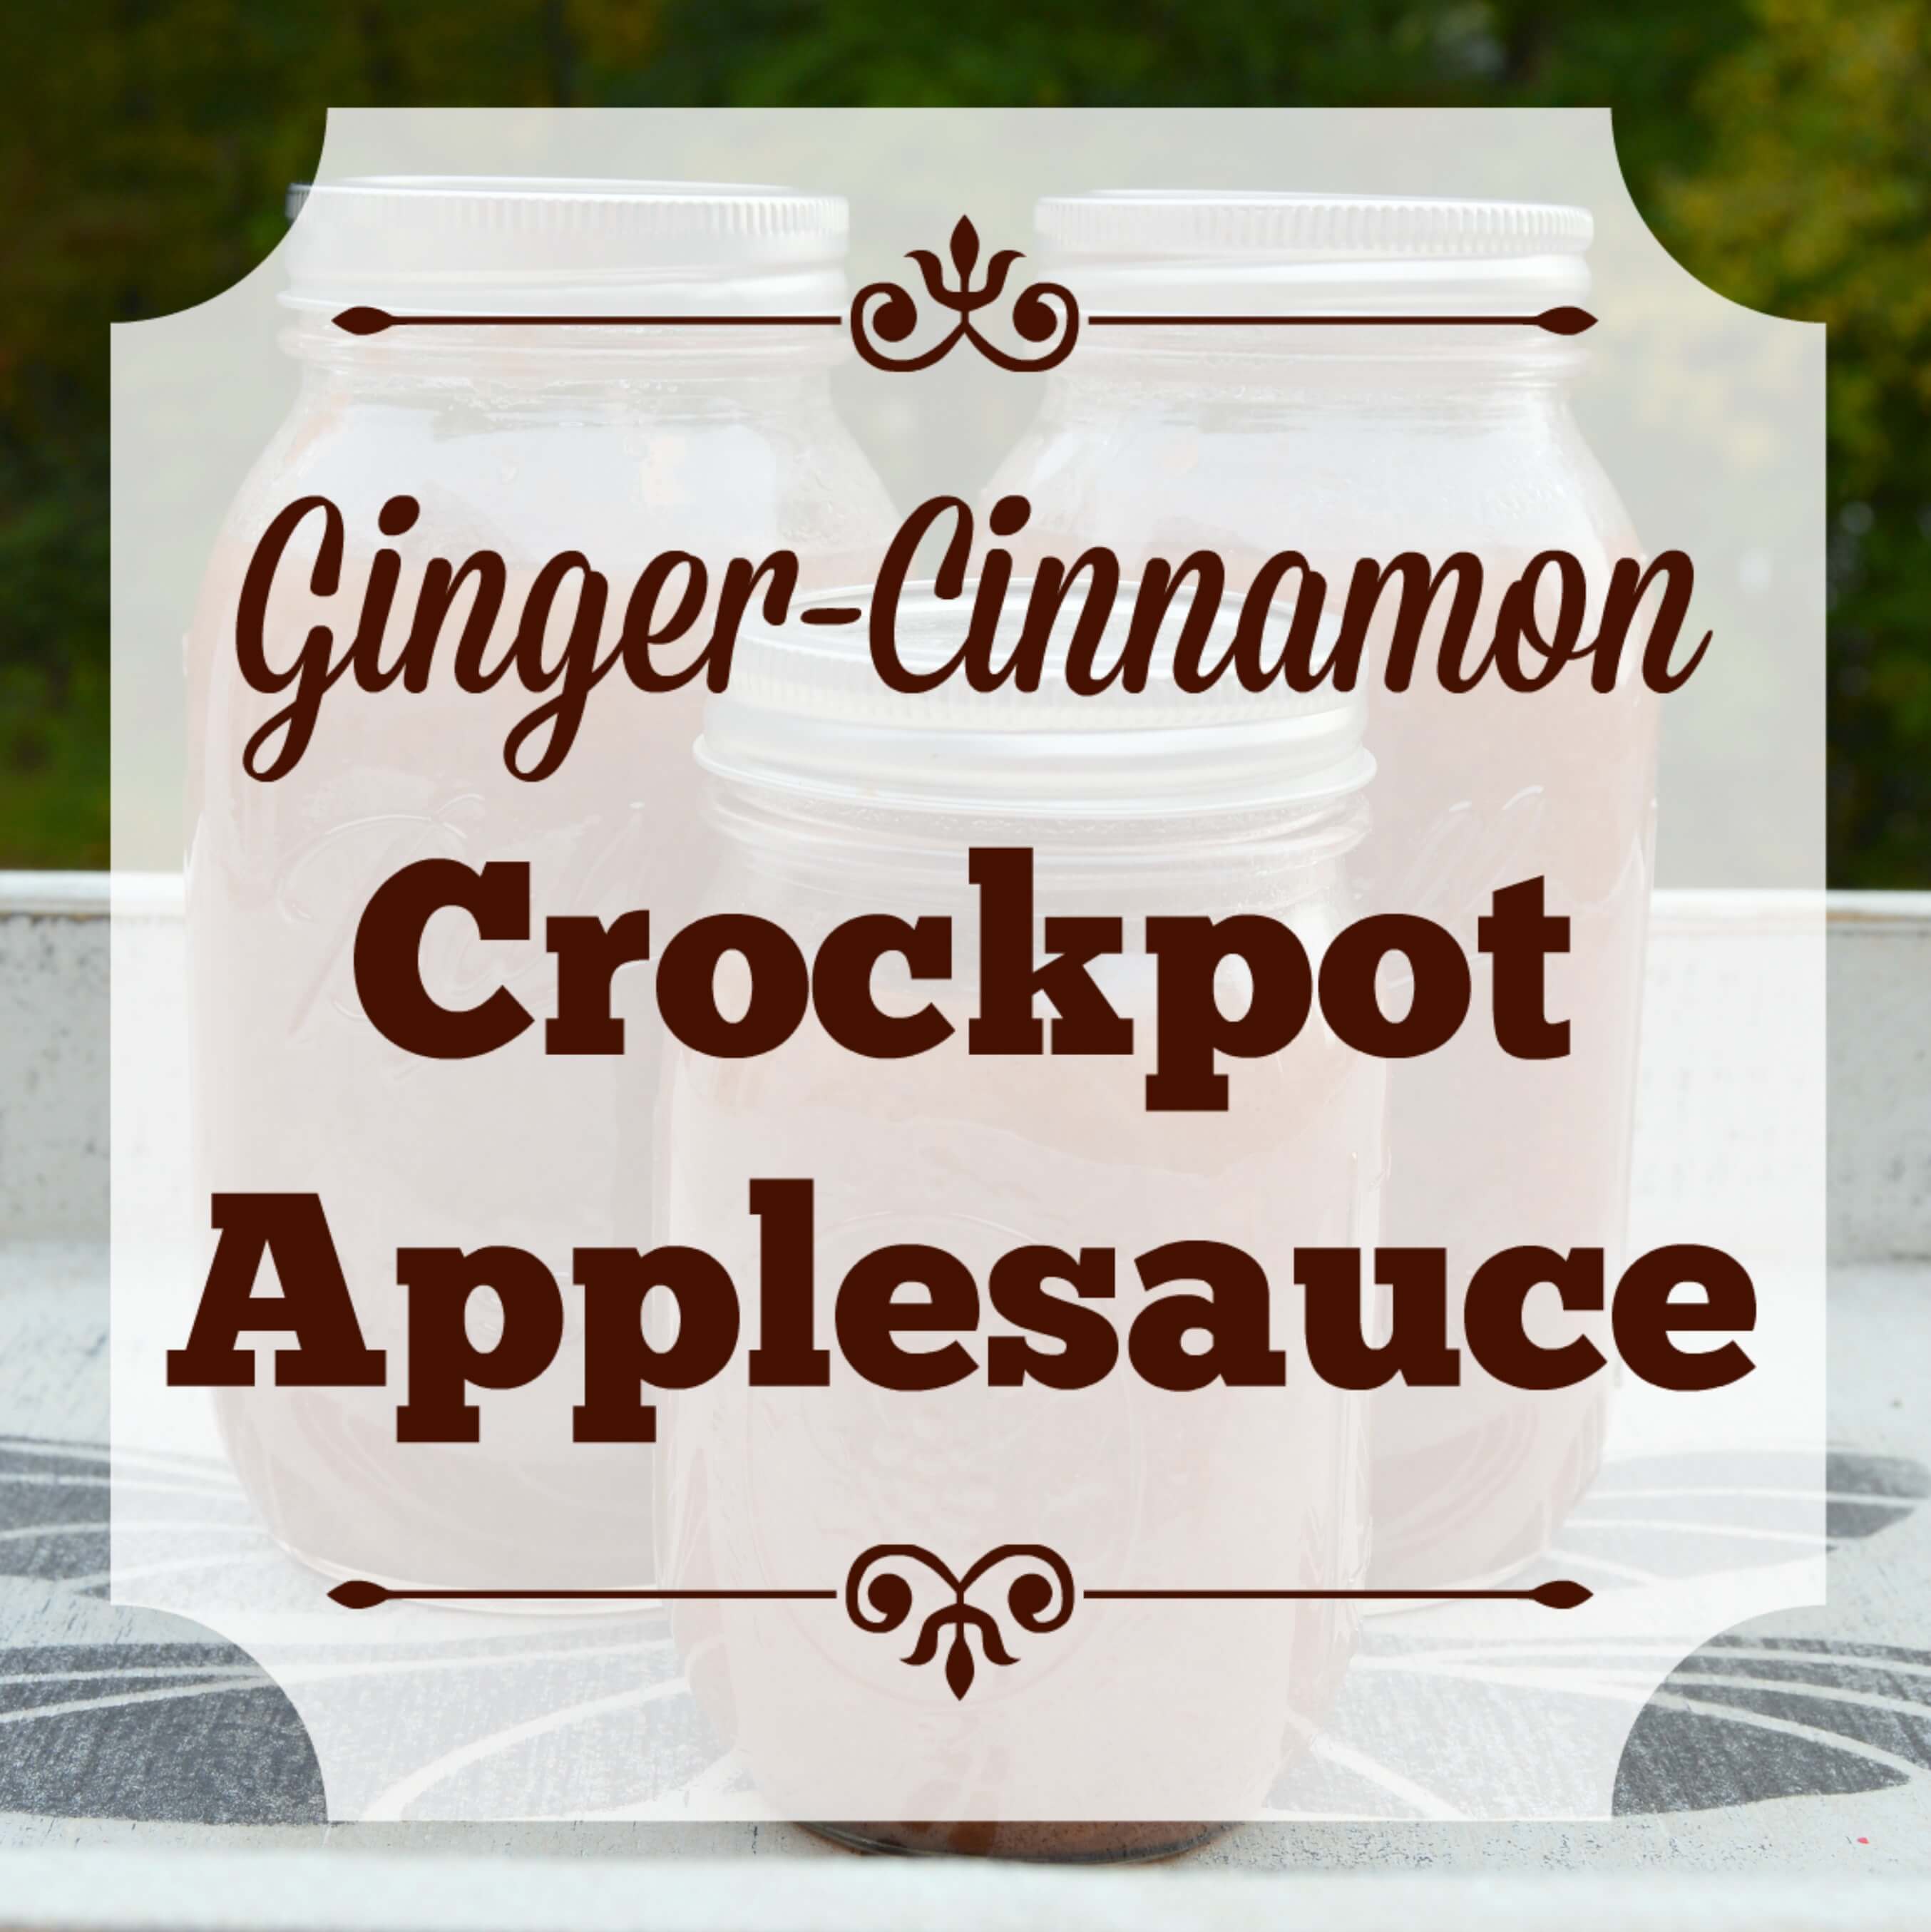 Love crockpot applesauce? Try this delicious variation with a touch of ginger!